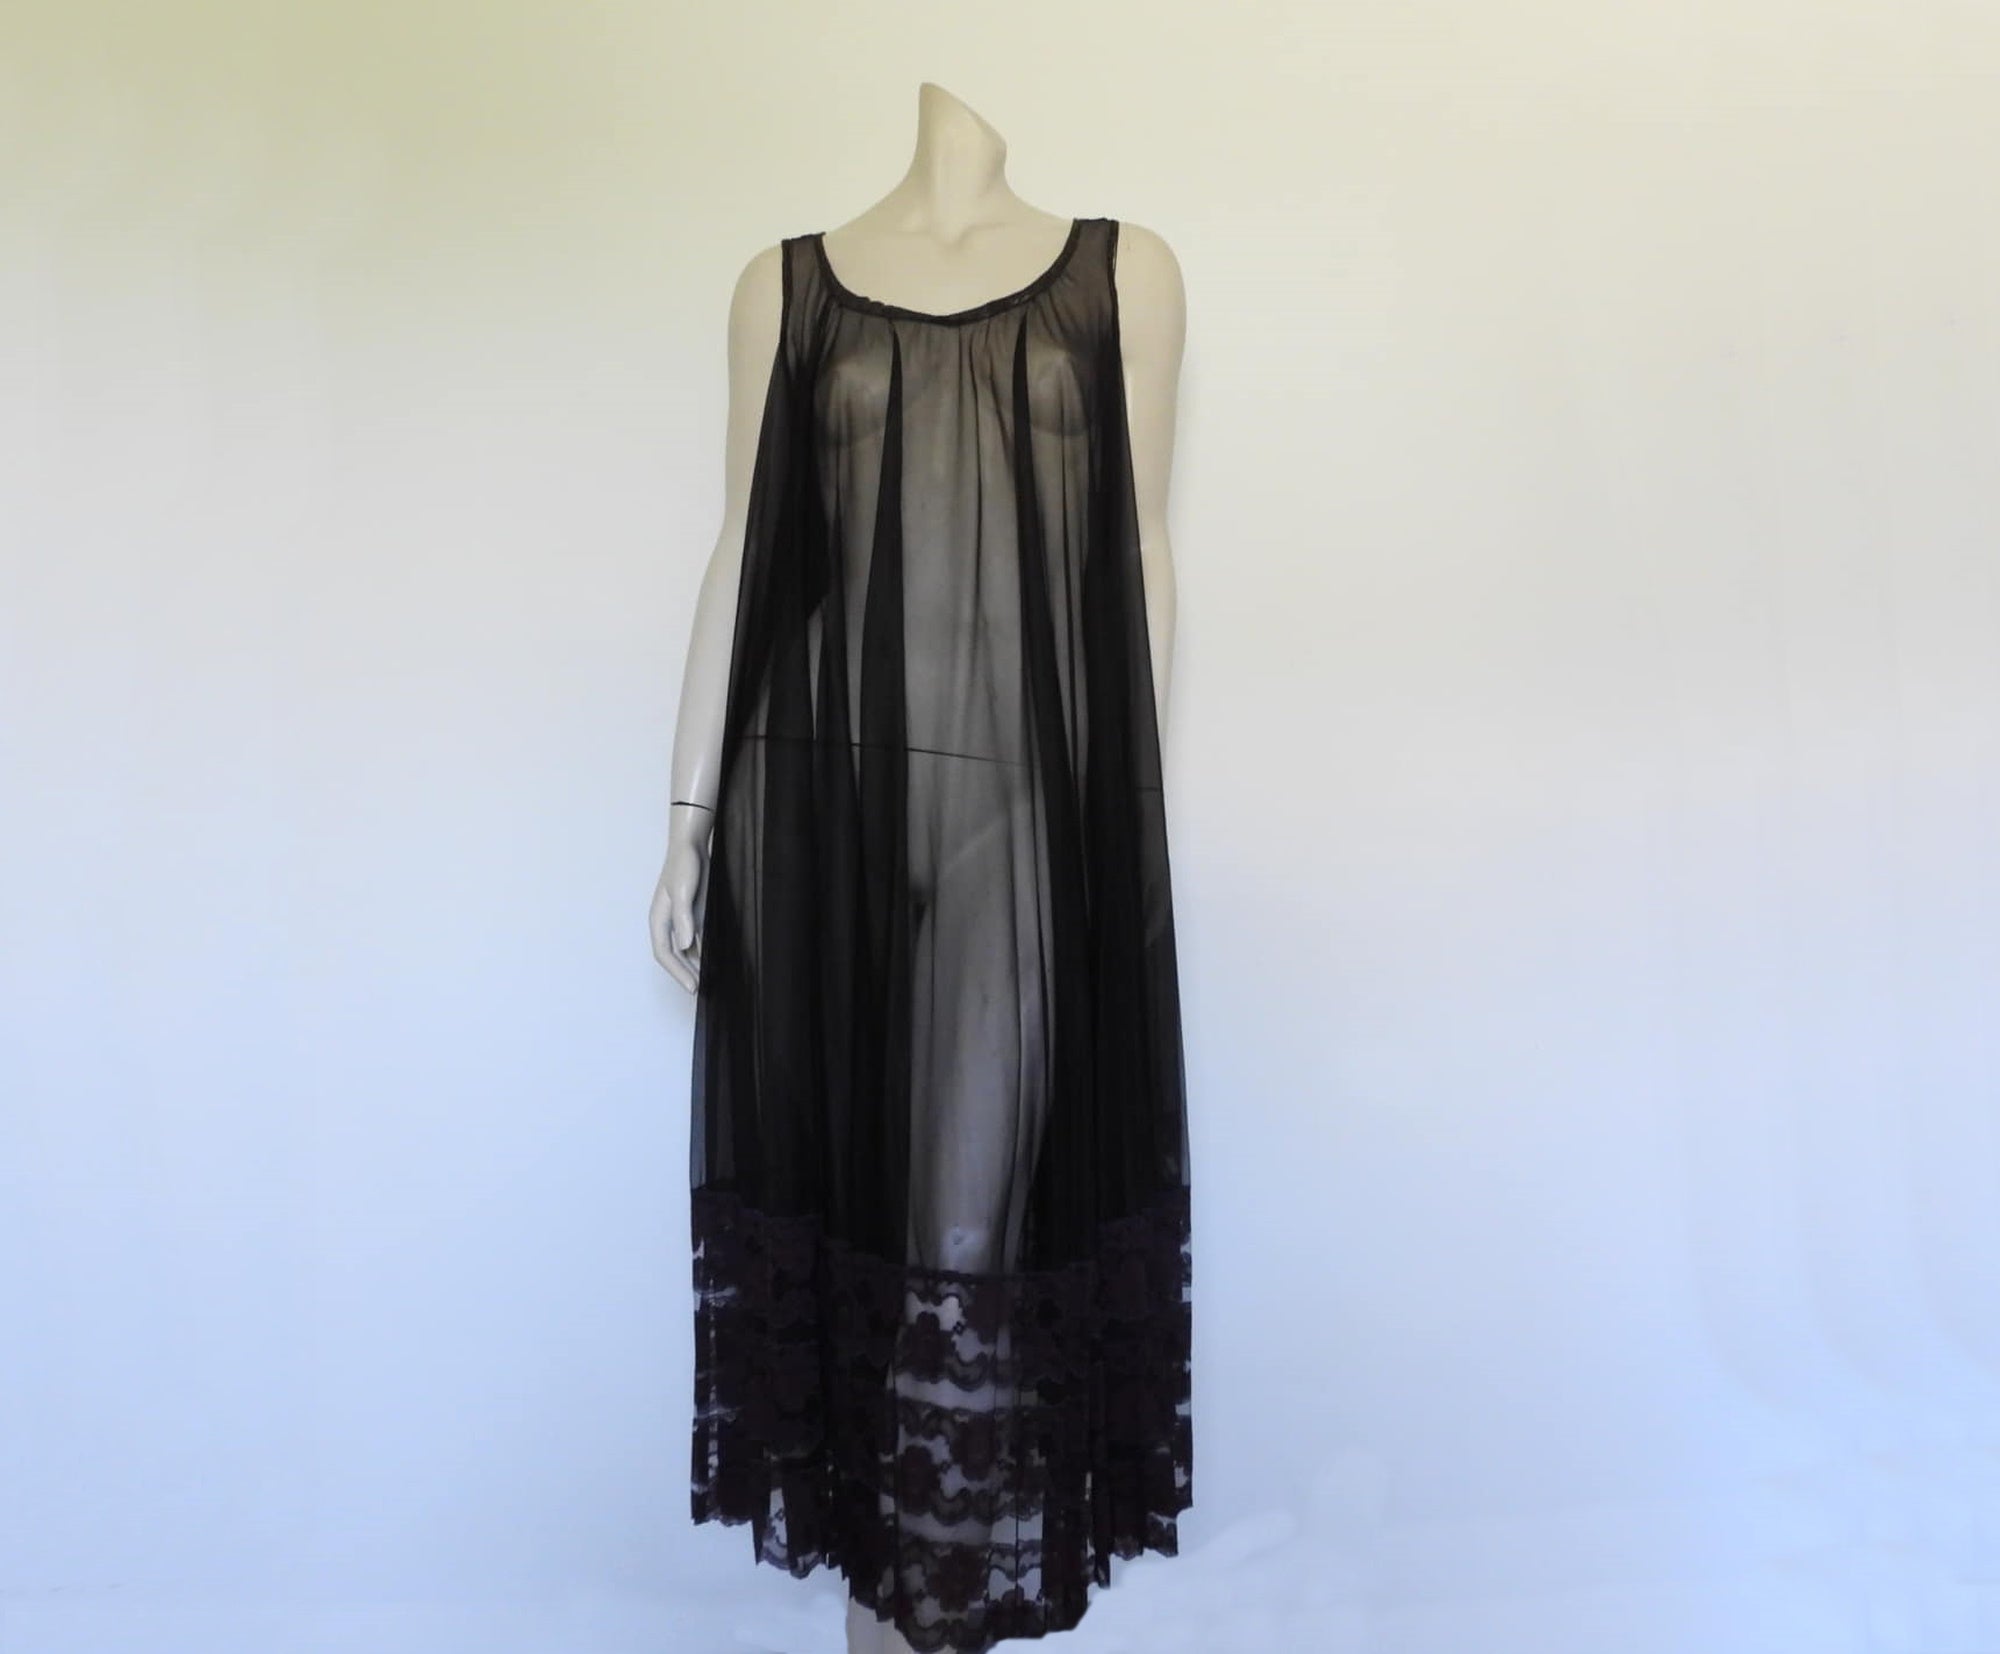 1960s Sheer Black Lacy Negligee Nightgown